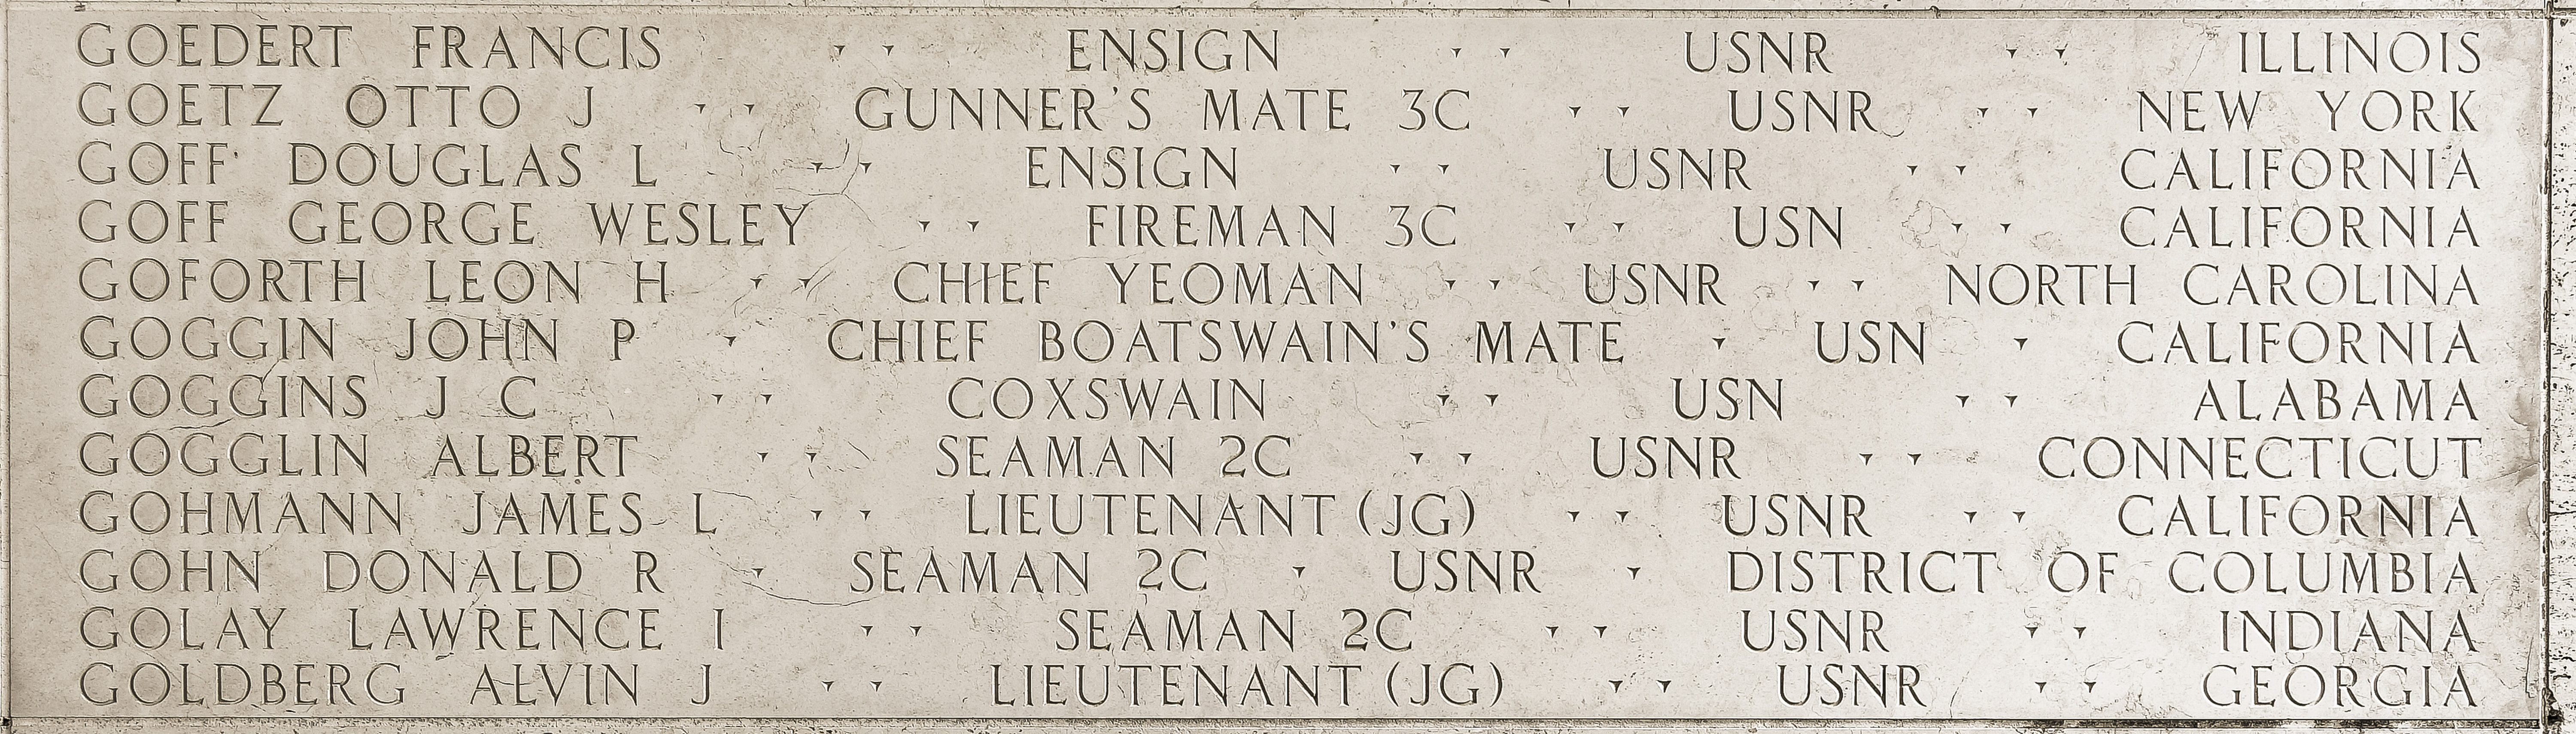 Lawrence I. Golay, Seaman Second Class